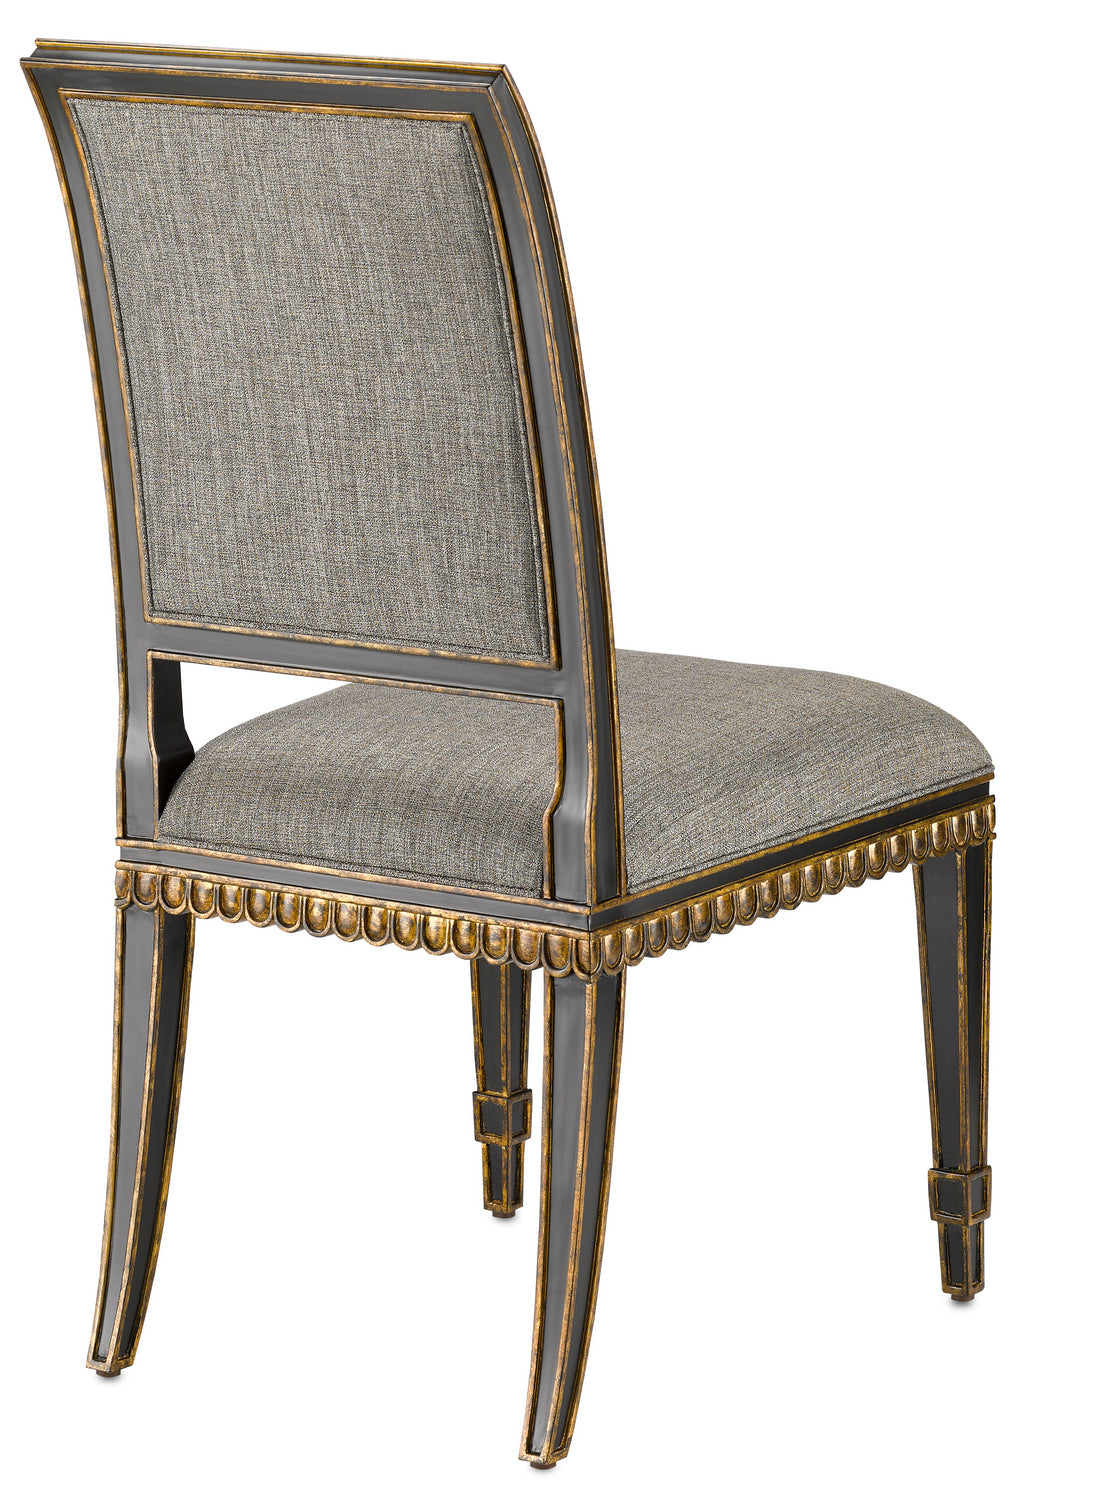 Chair from the Ines collection in Caviar Black/Antique Gold finish